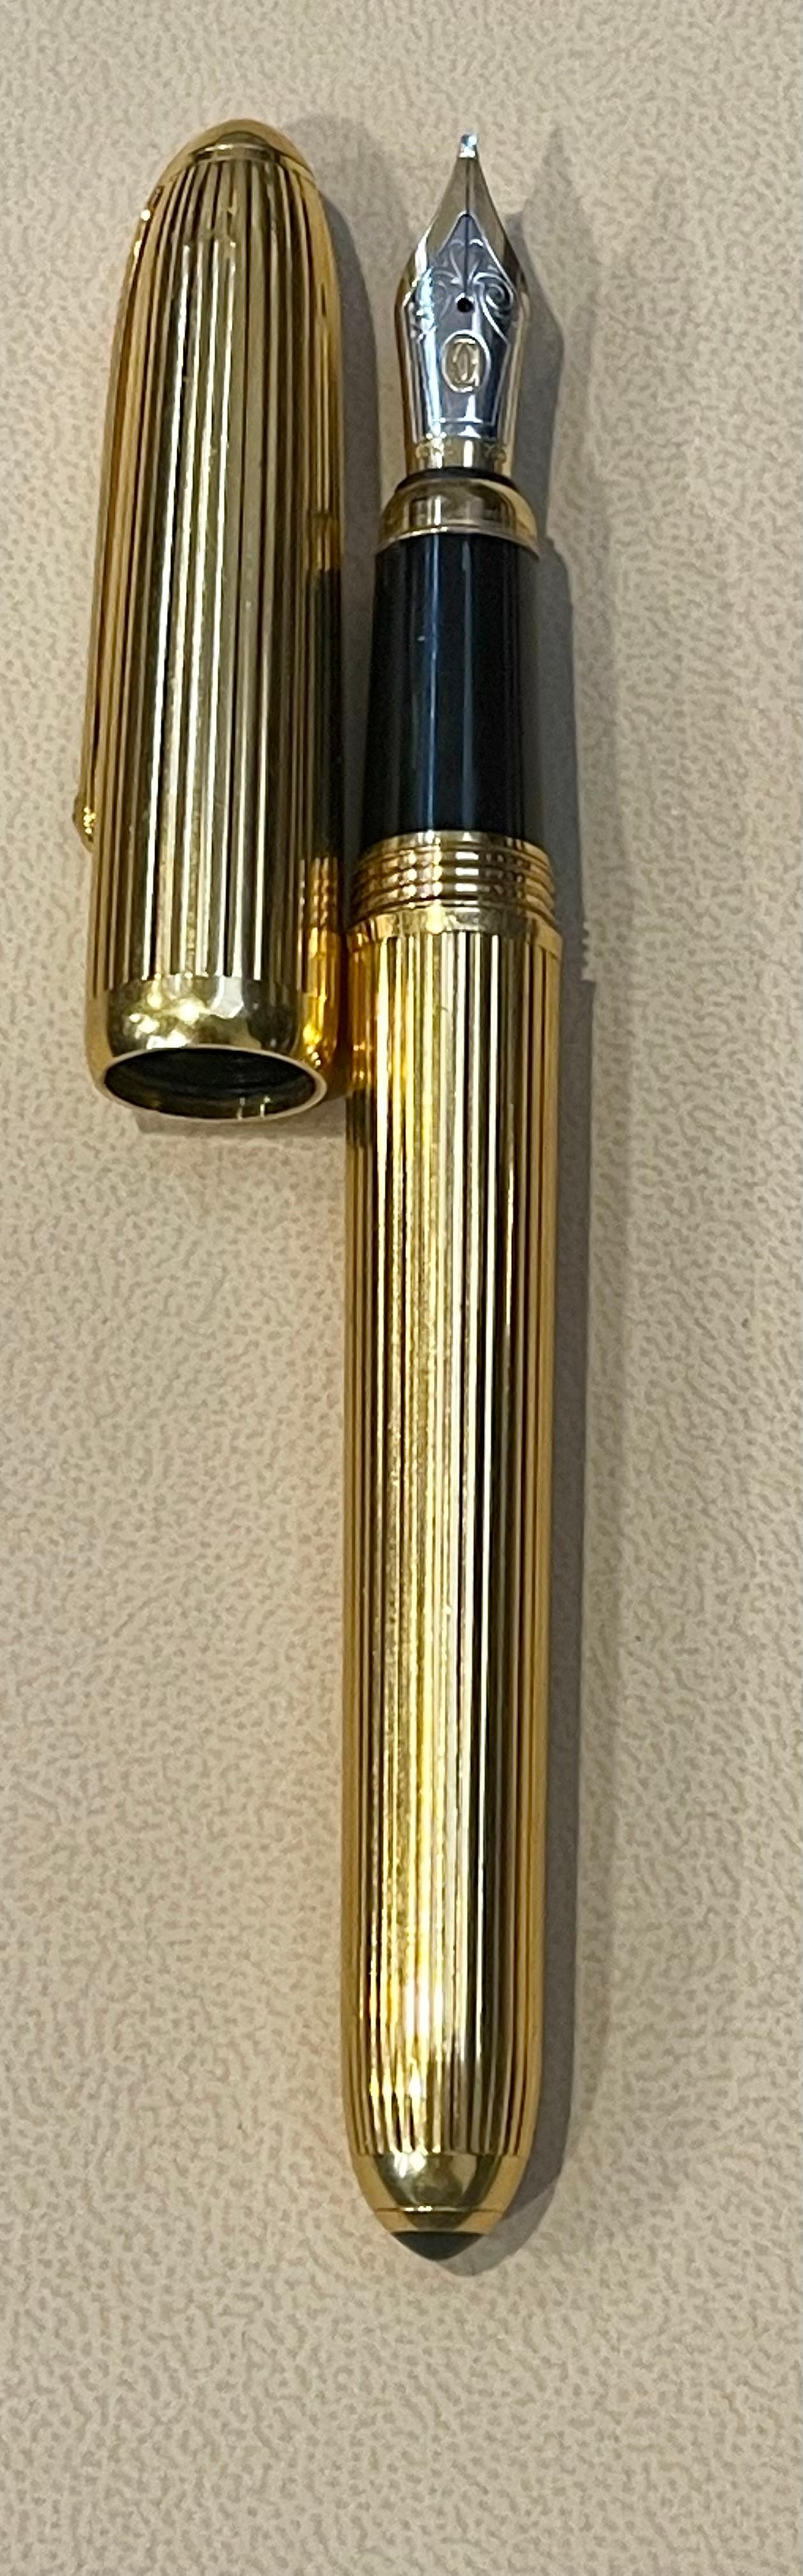 012360 Cartier 'Louis Cartier' Fountain Pen in Gold Plate with Cover, 56.4 Gm. 3